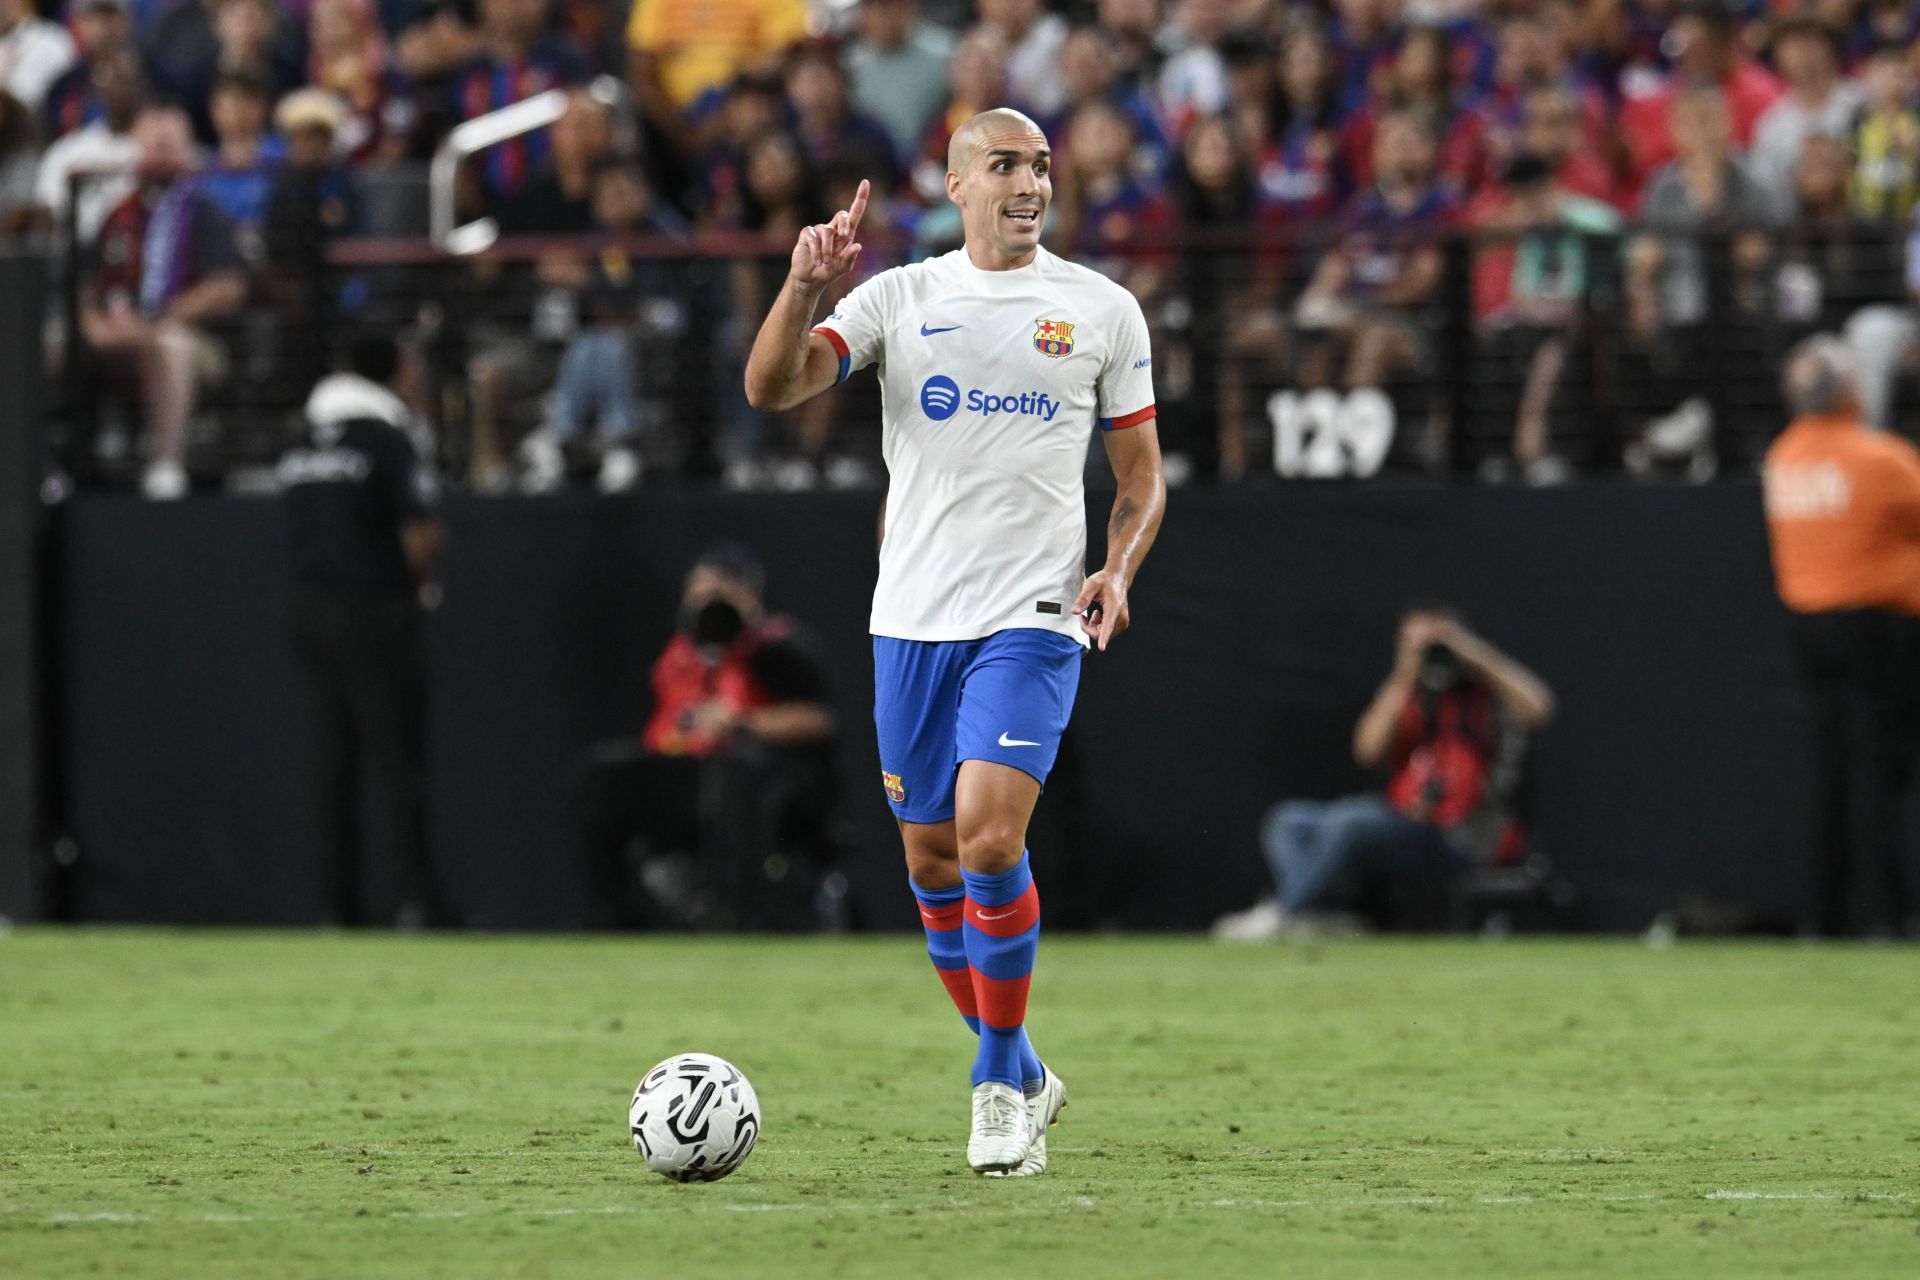 Oriol Romeu has failed to live up to expectations at the Camp Nou.